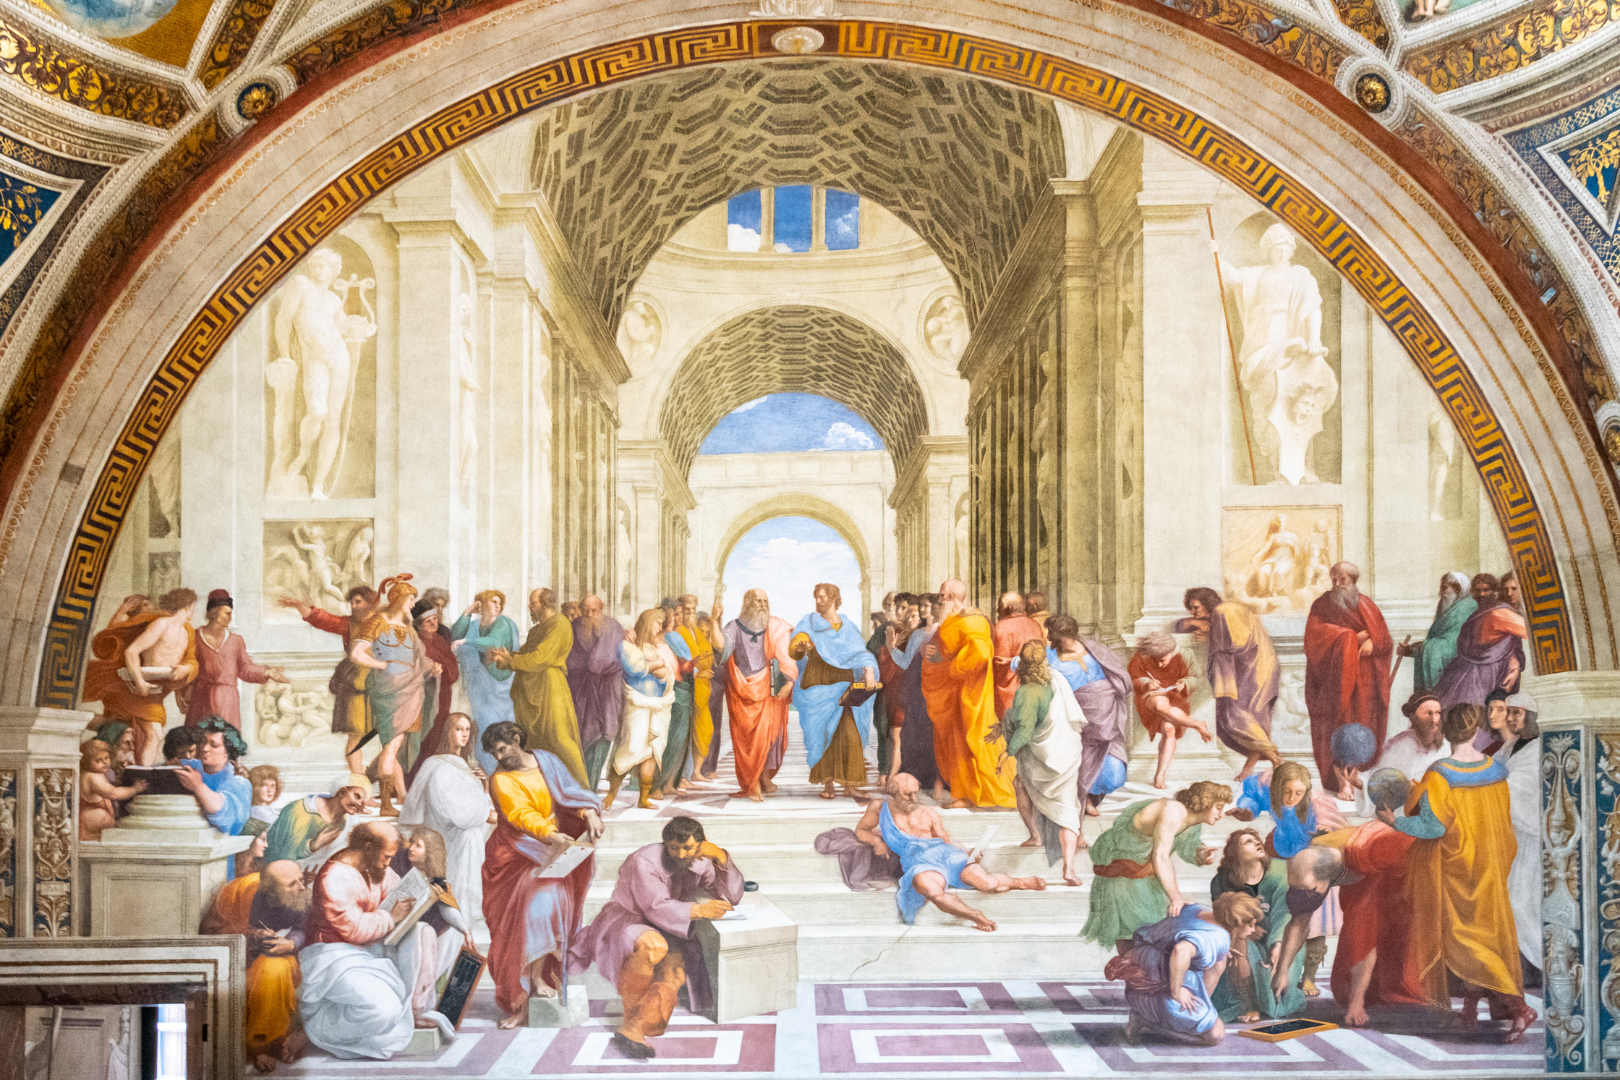 School of Athens painting by Raphael in the Vatican Museums.